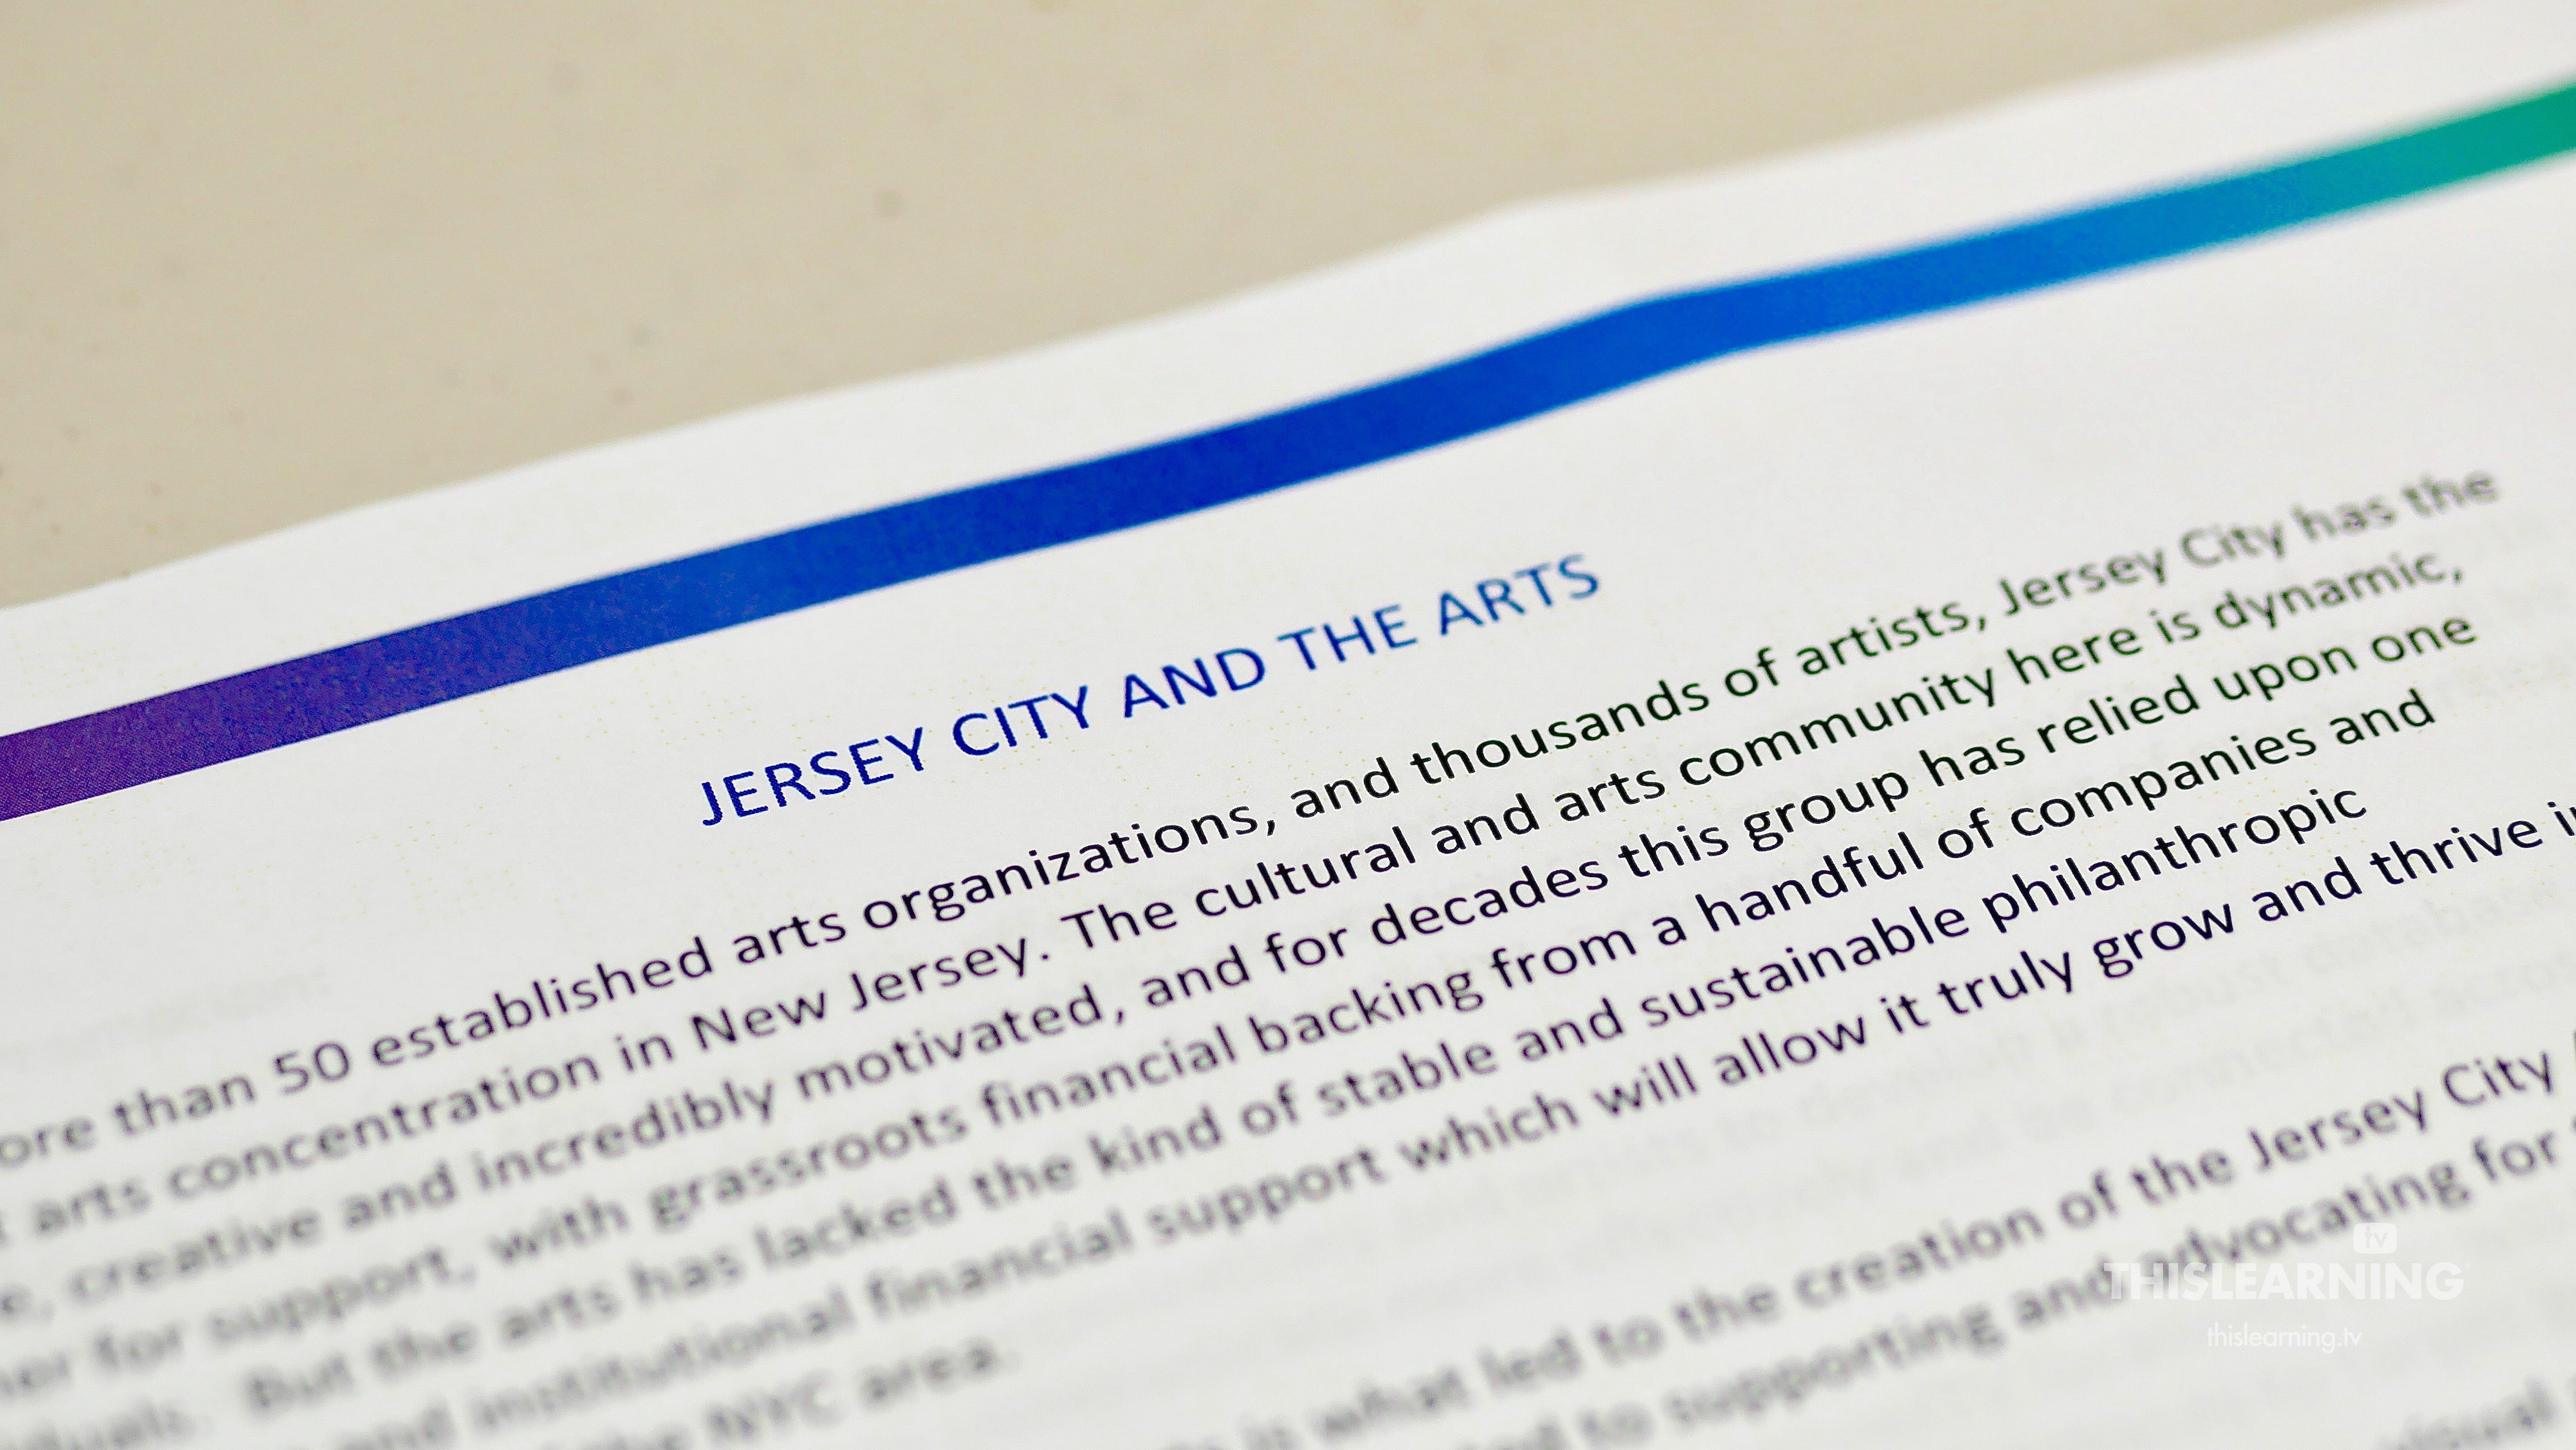 Jersey City Arts Council Annual Meeting